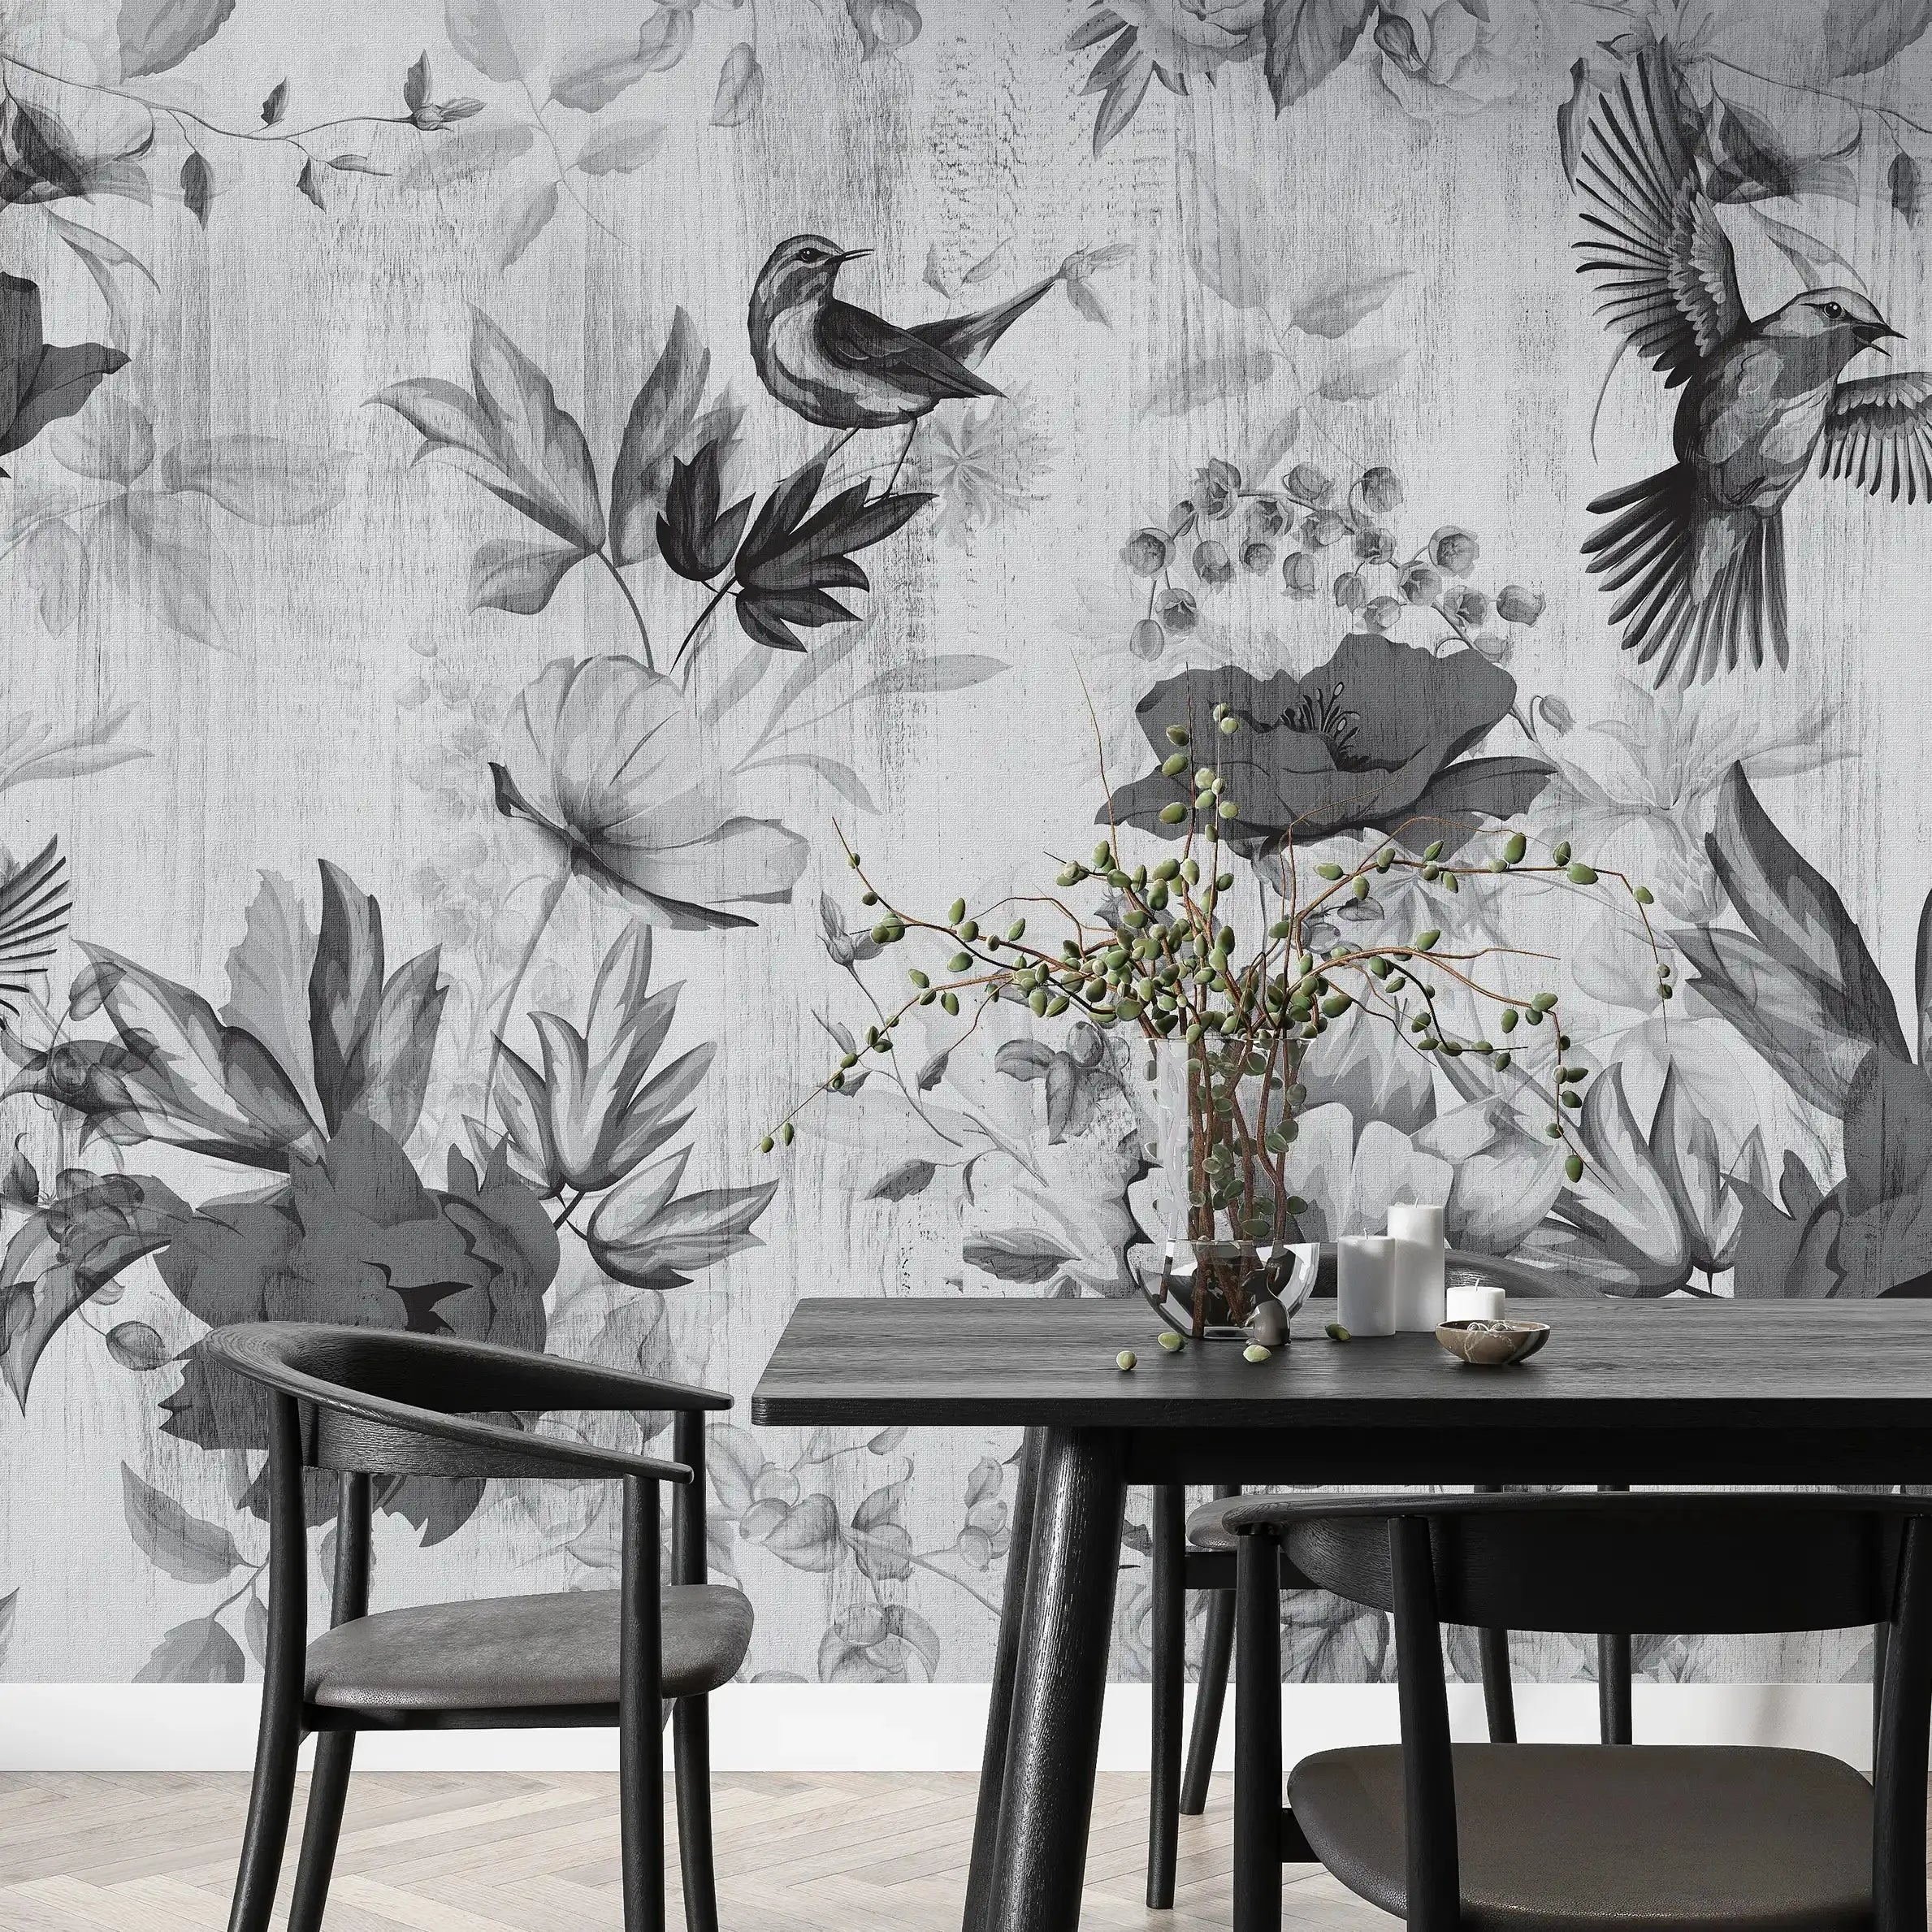 3041-E / Removable Tropical Leaf Wallpaper: Peel and Stick Vintage Red Floral Mural with Birds, Ideal for Nursery, Kitchen & Bathroom - Artevella